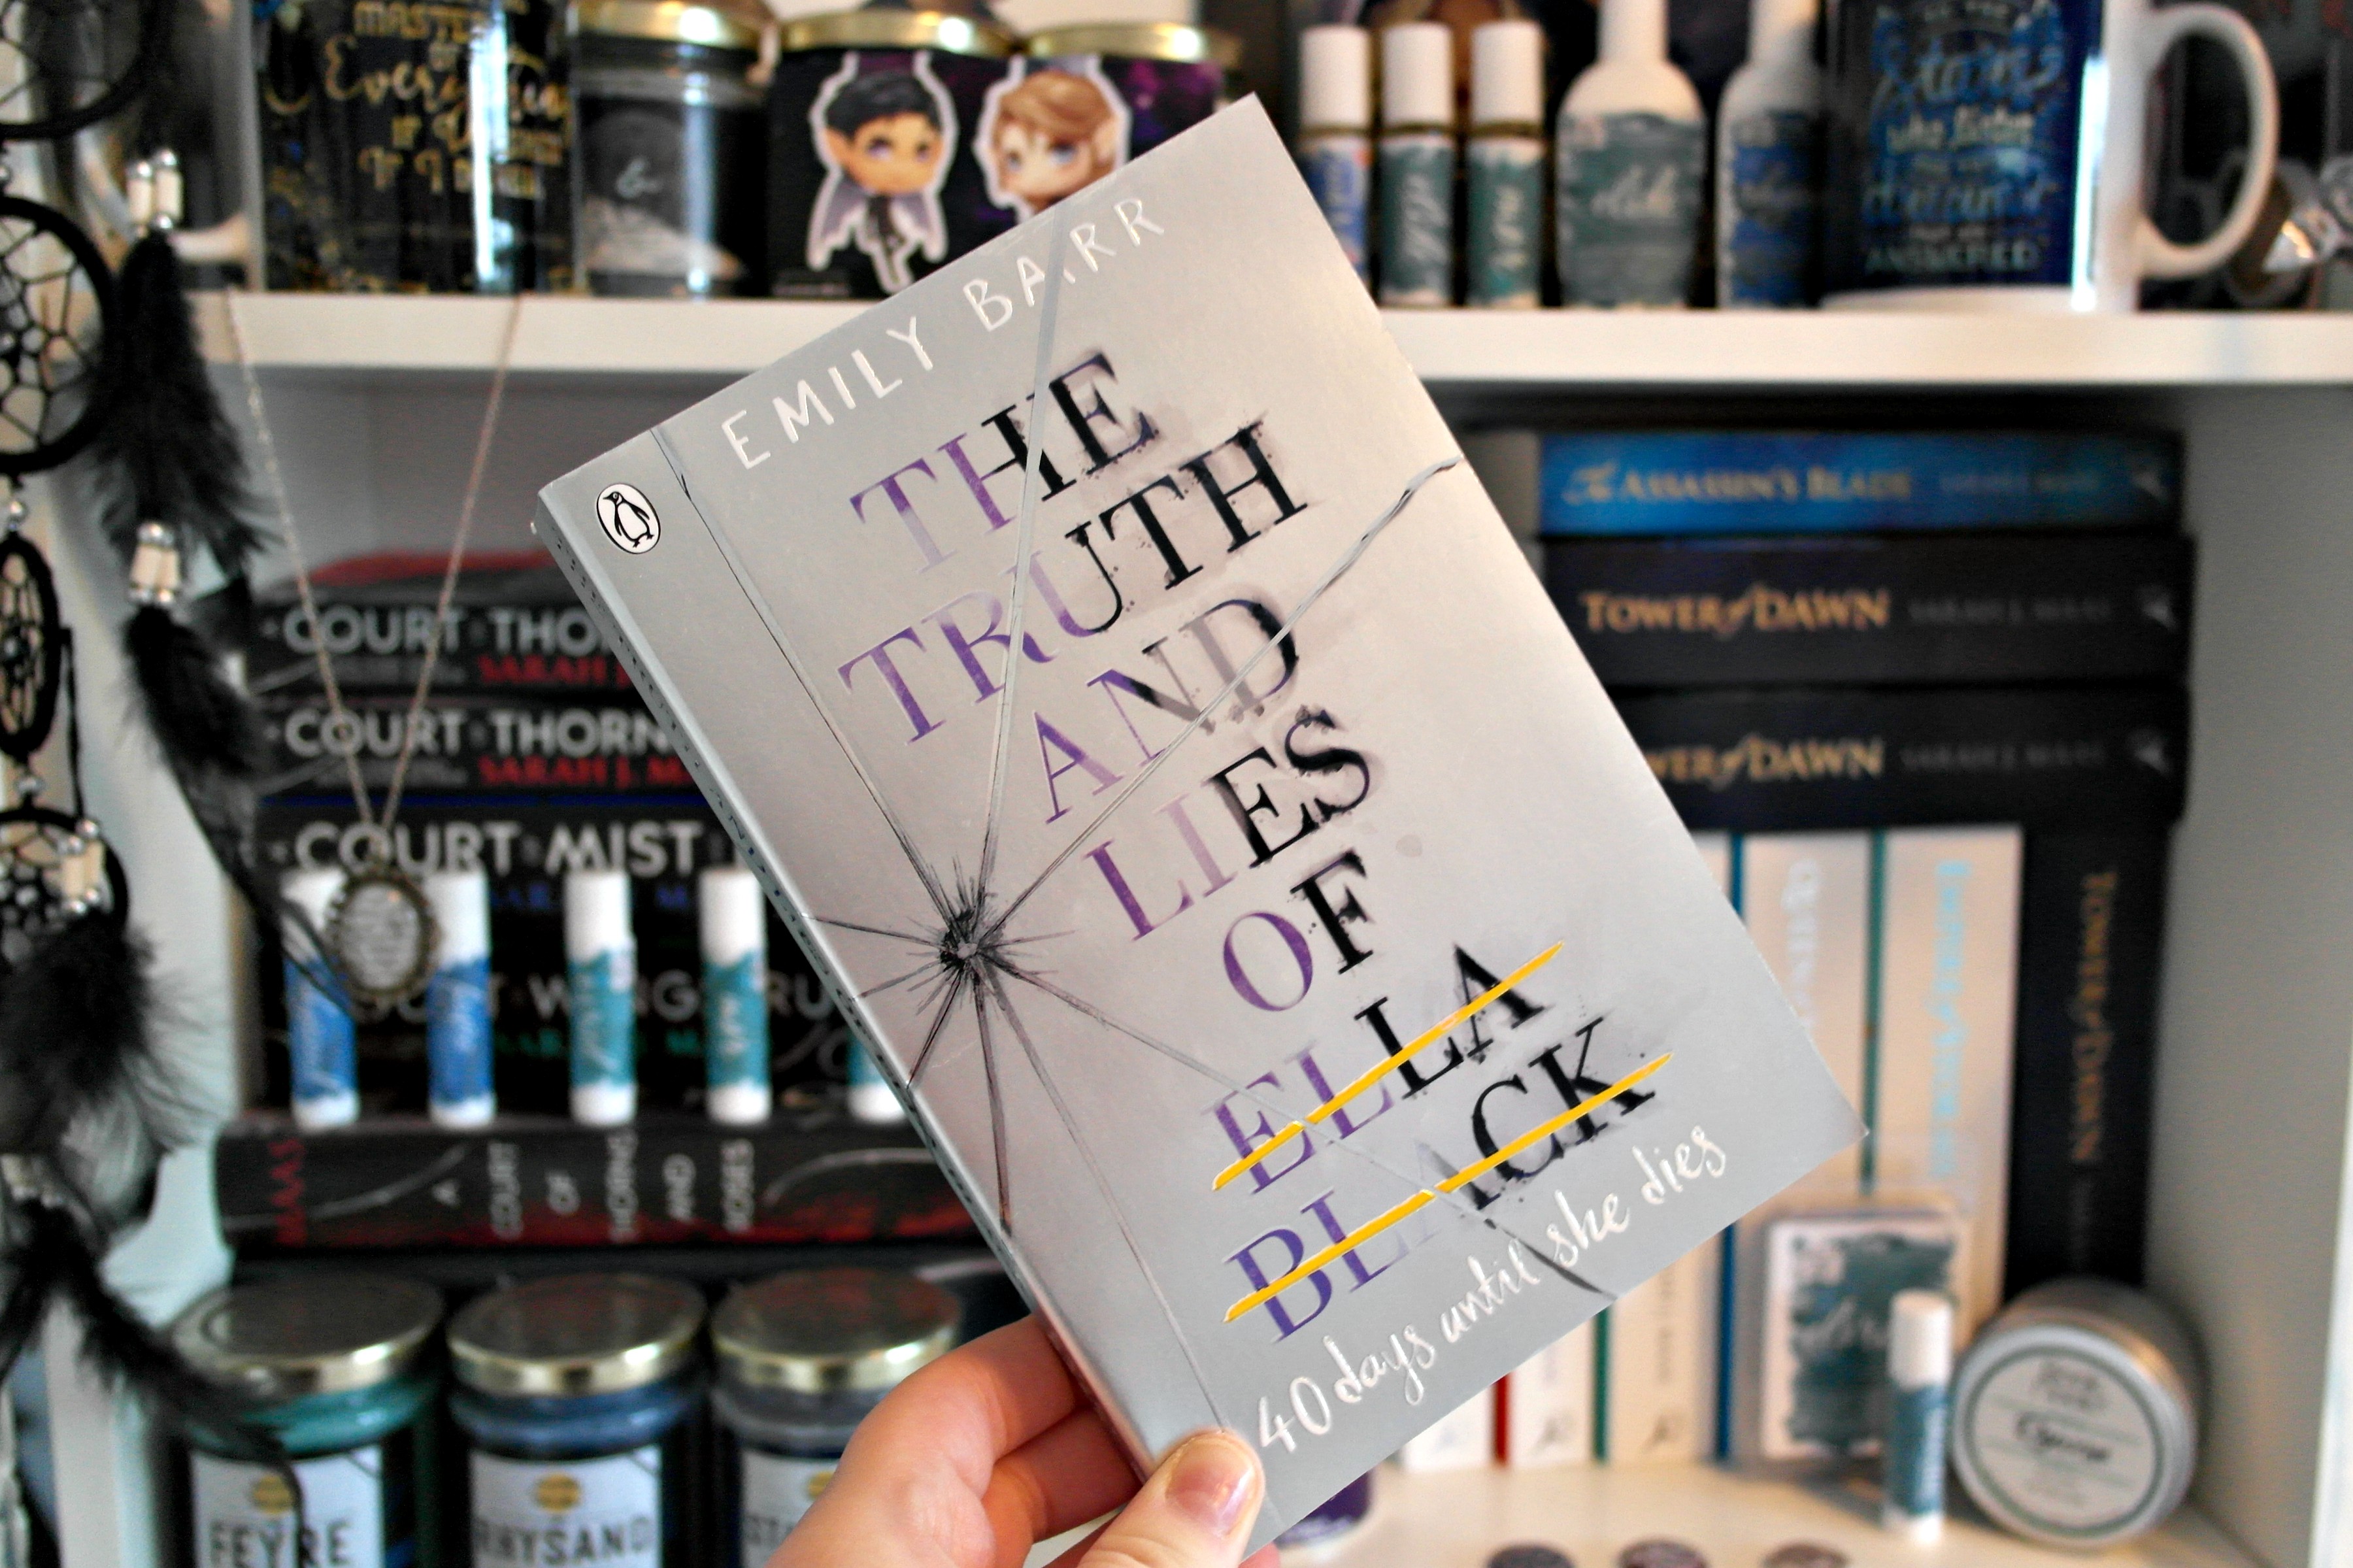 The Truth and Lies of Ella Black Review